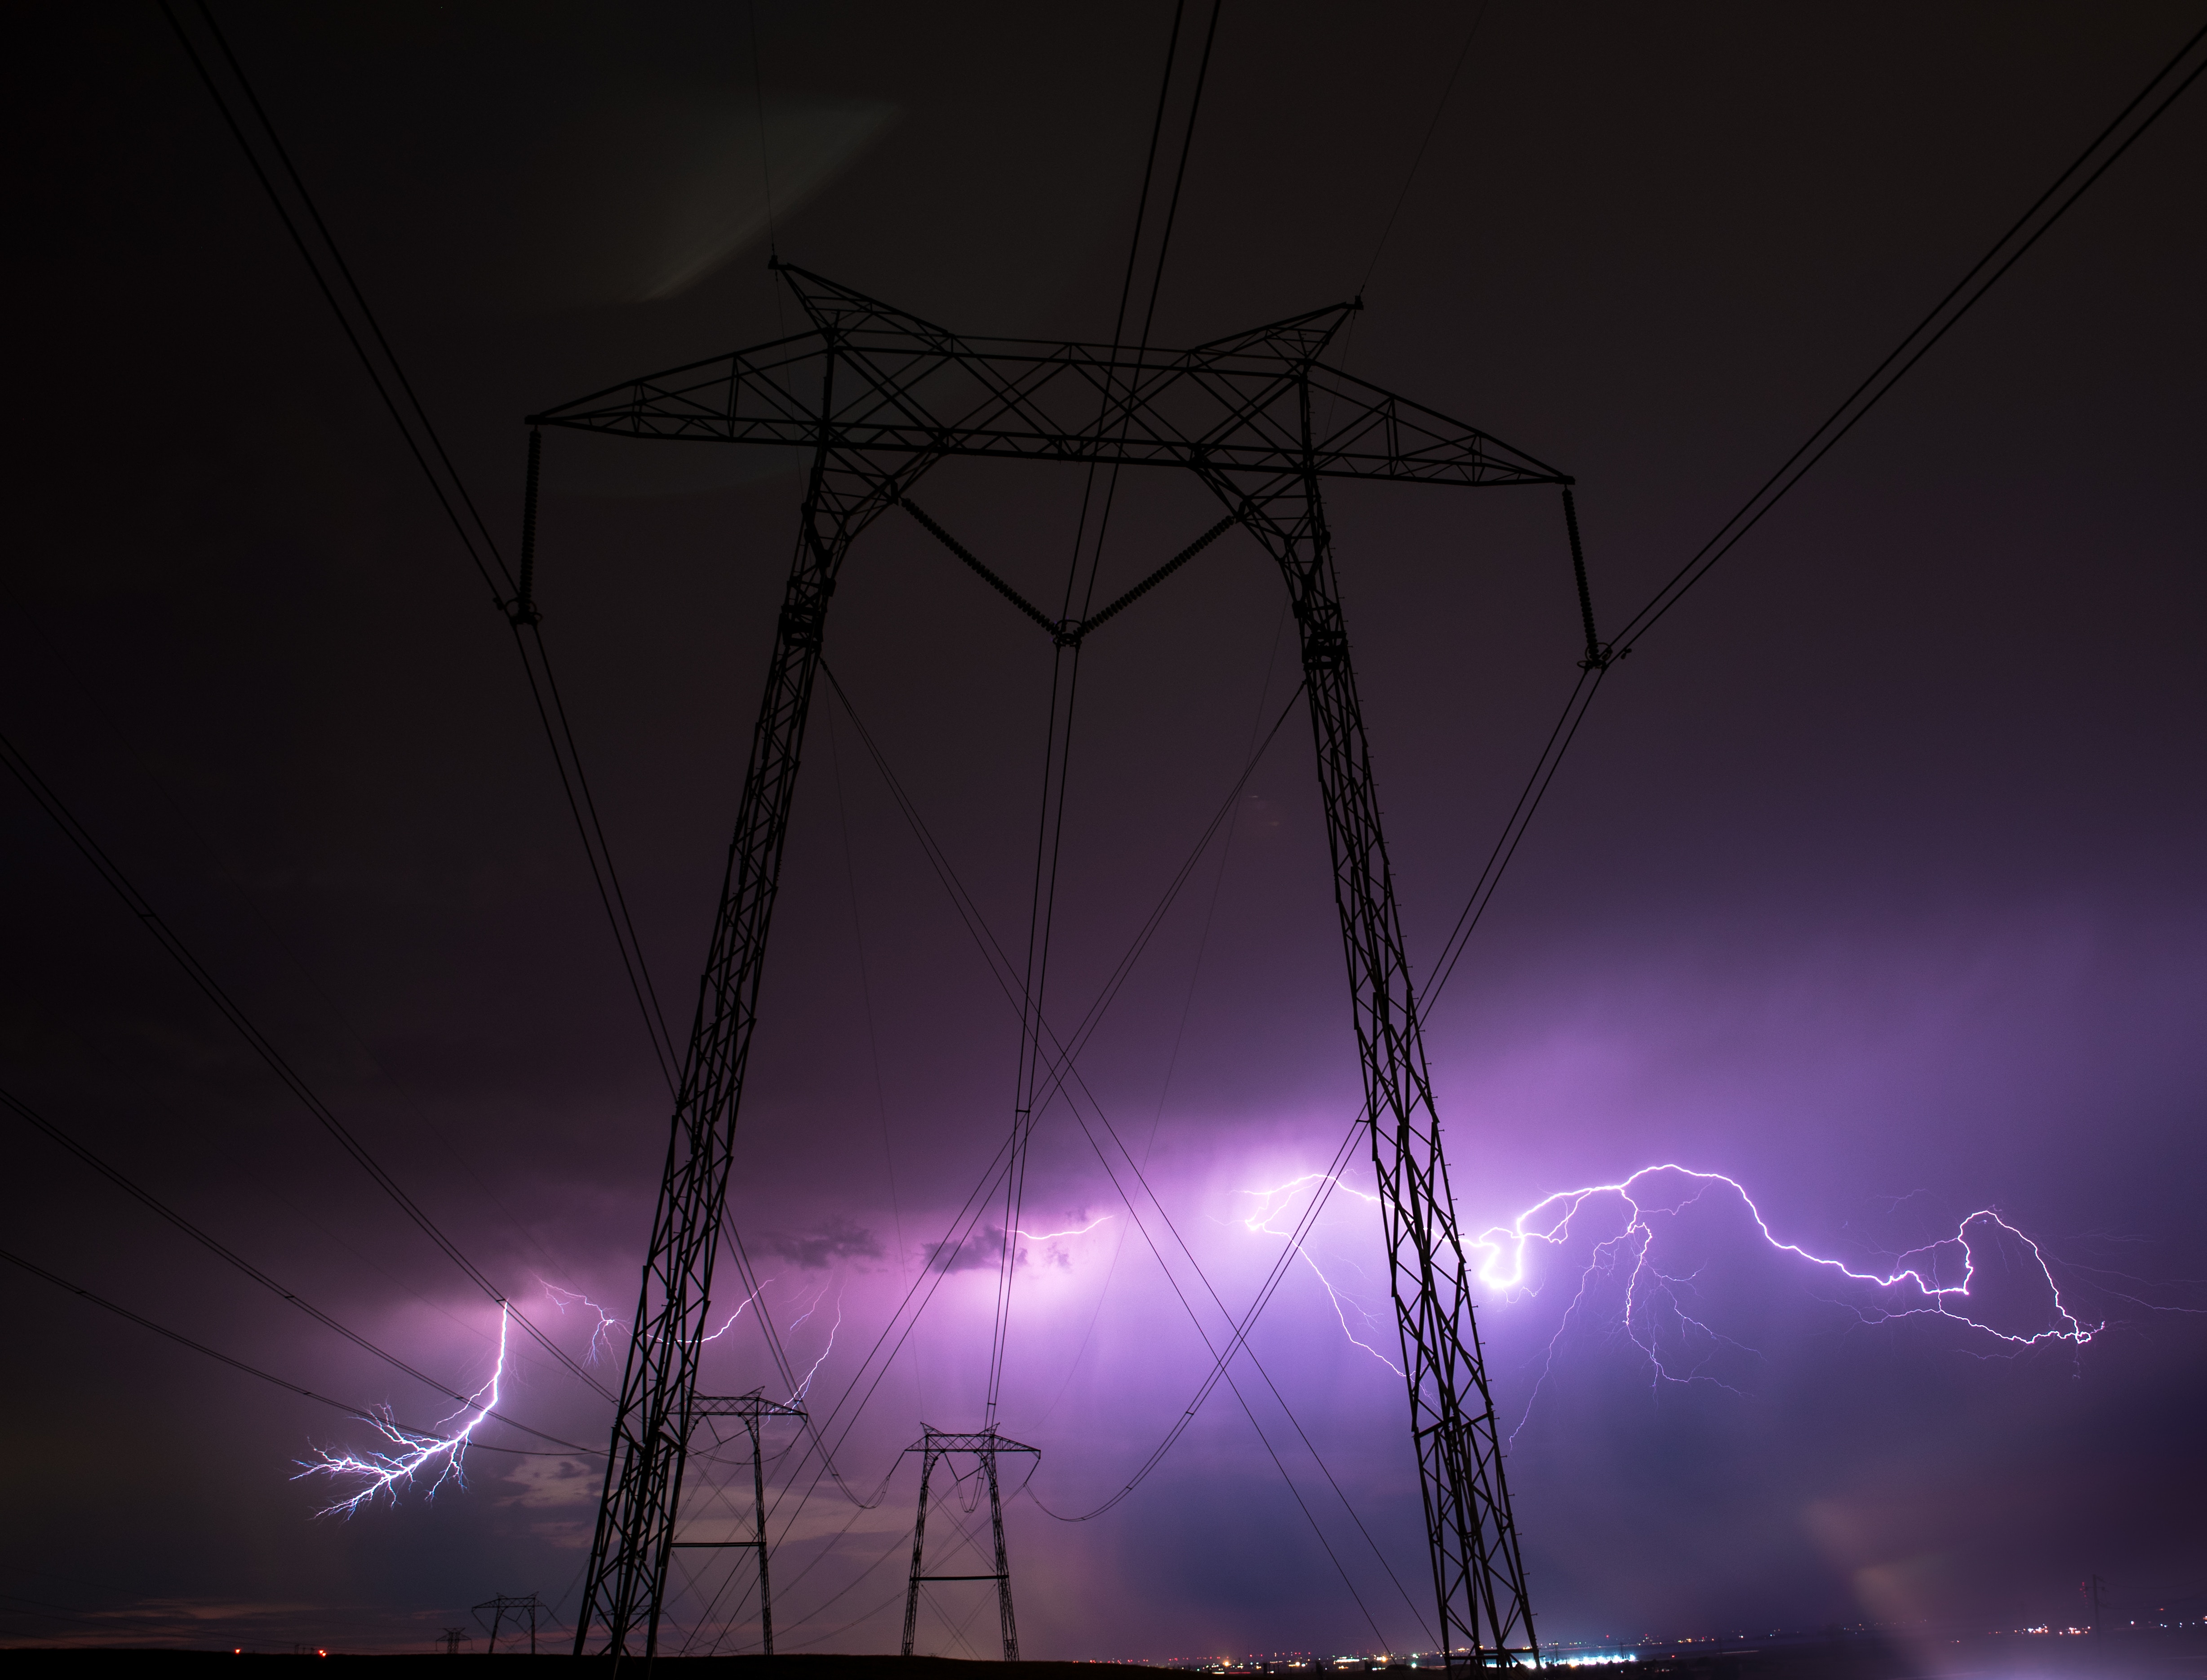 storm, nature, sky, night, mainly cloudy, overcast, thunderstorm, wires, wire